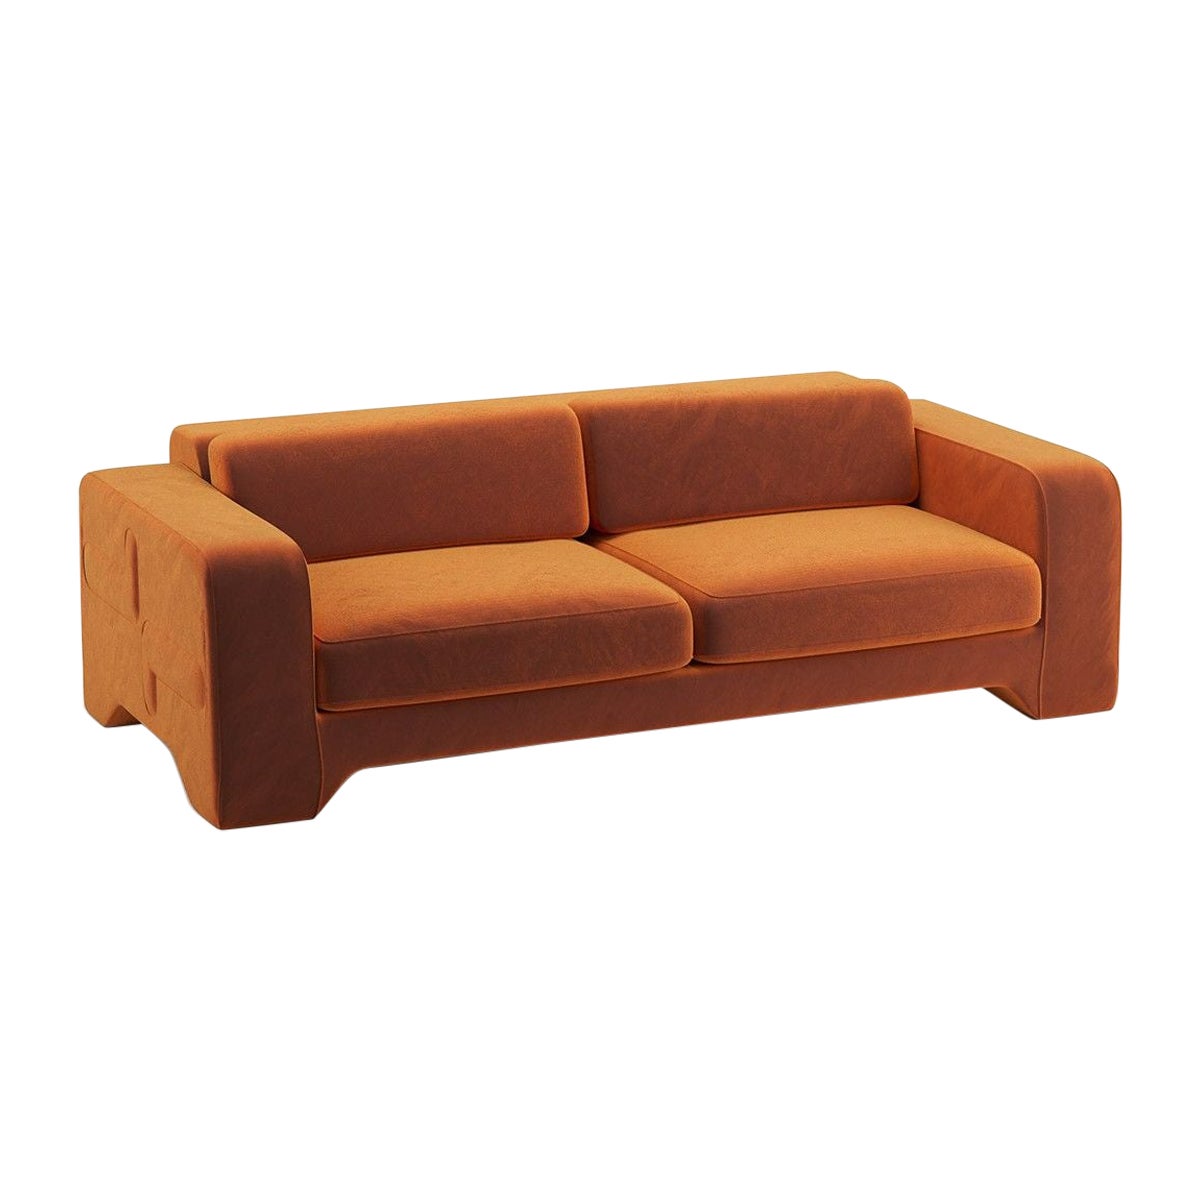 Popus Editions Giovanna 4 Seater Sofa in Amber Como Velvet Upholstery